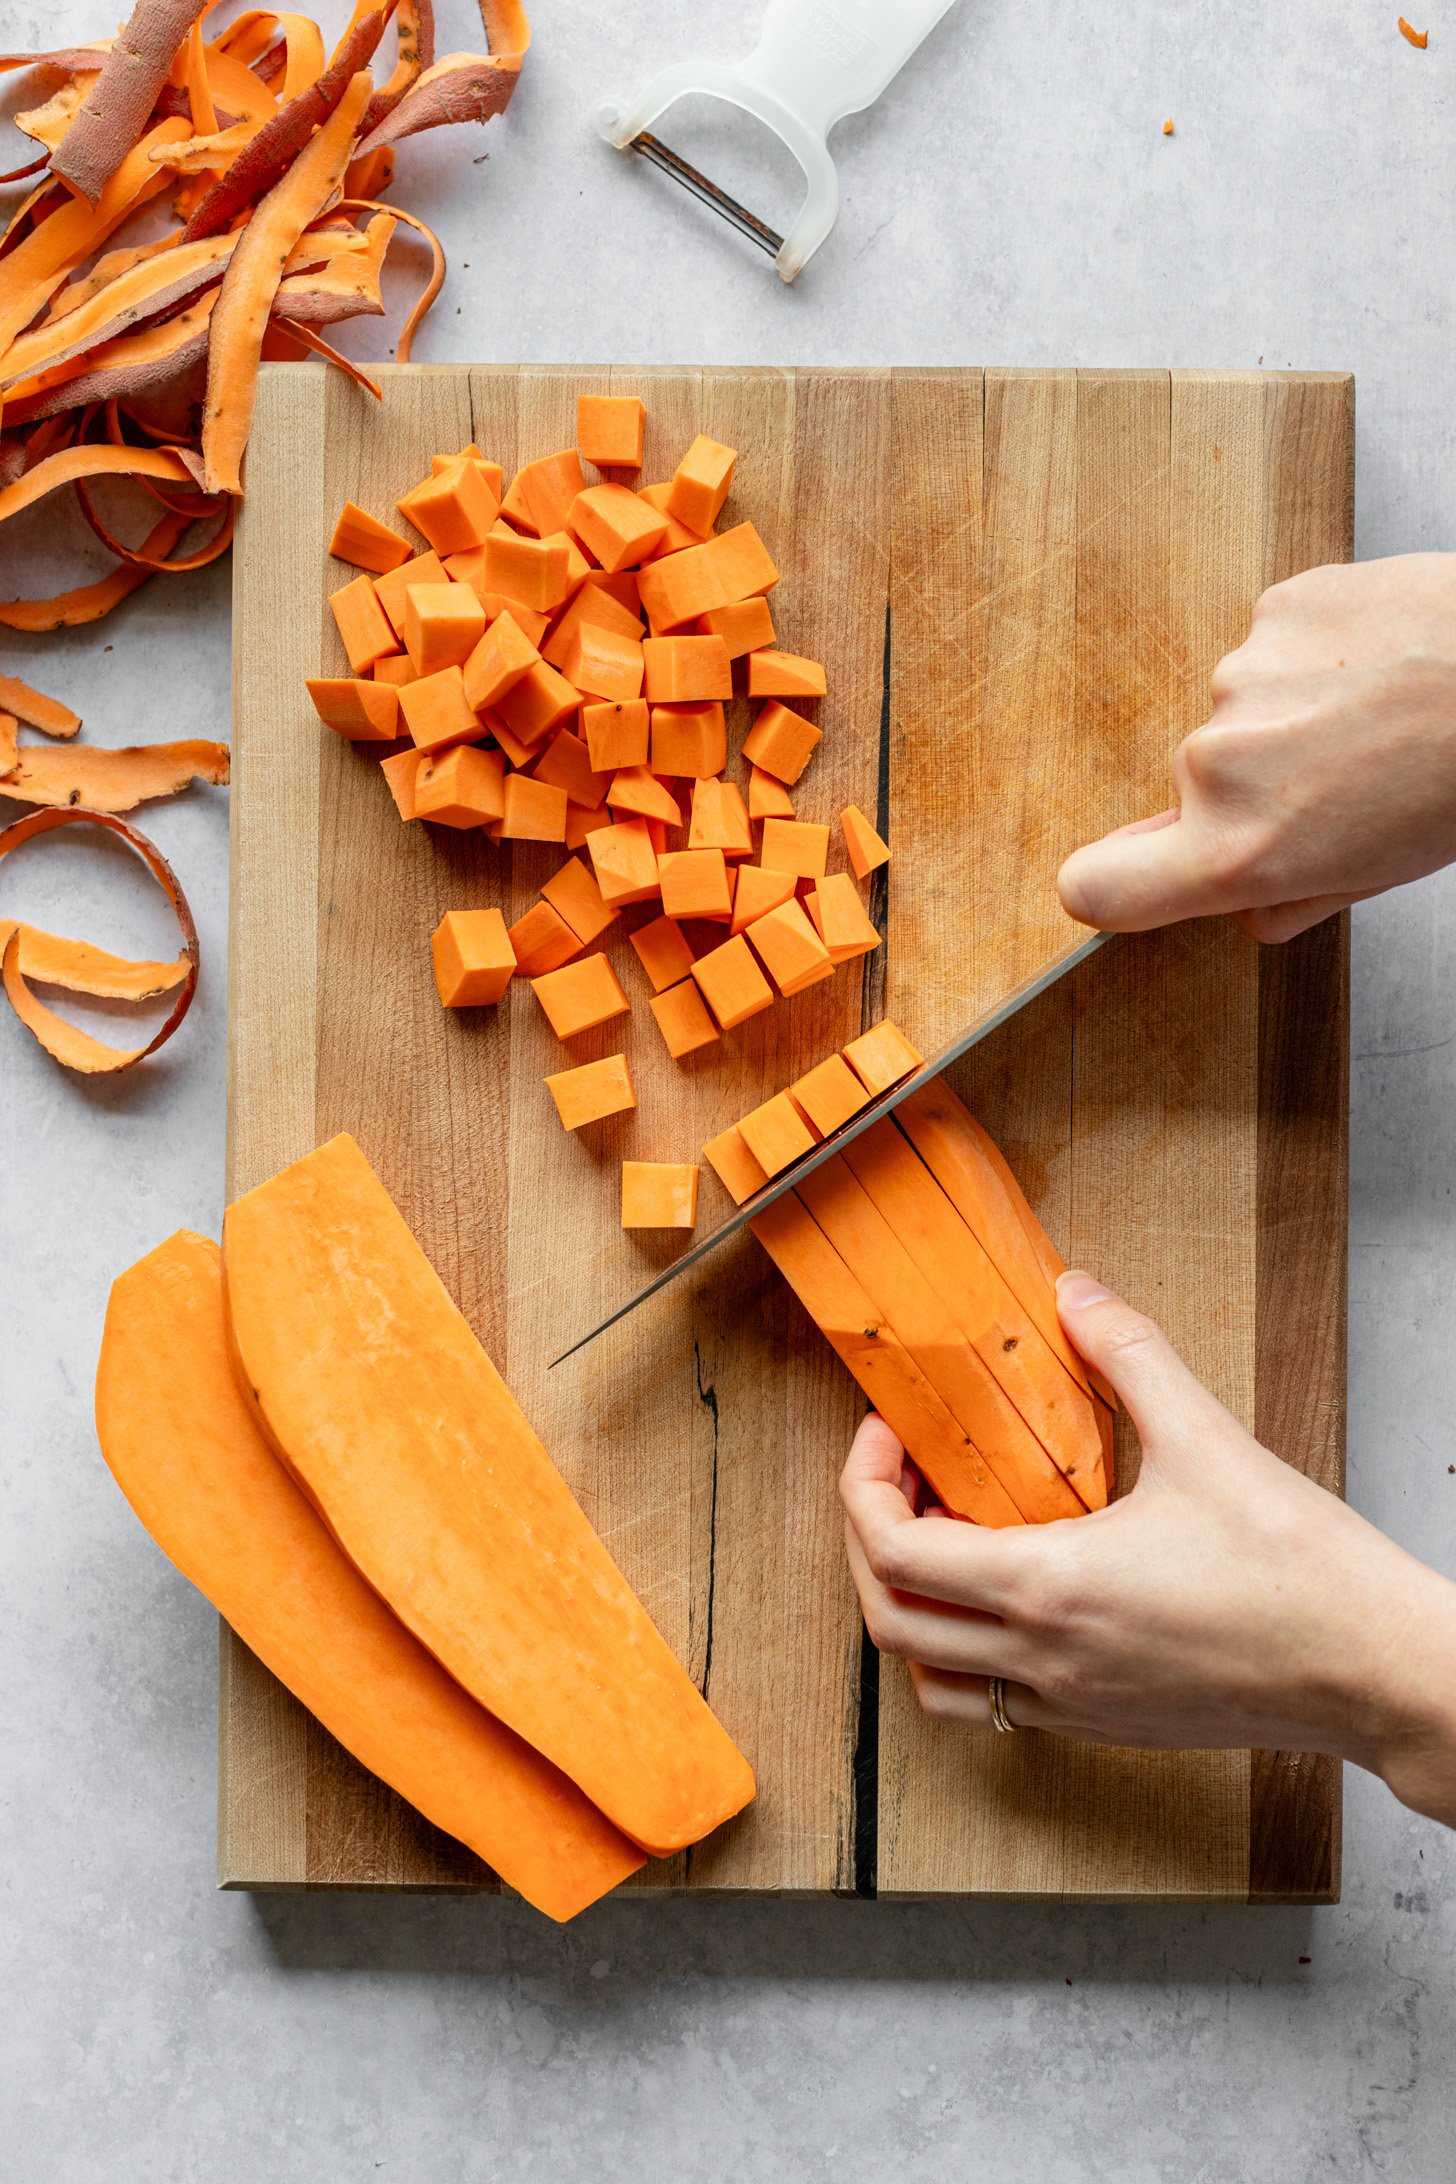 Sweet potato slices are being cut into cubes (diced) on a wooden cutting board on a grey table. Sweet potato skin and a vegetable peeler are off to the side on the table.